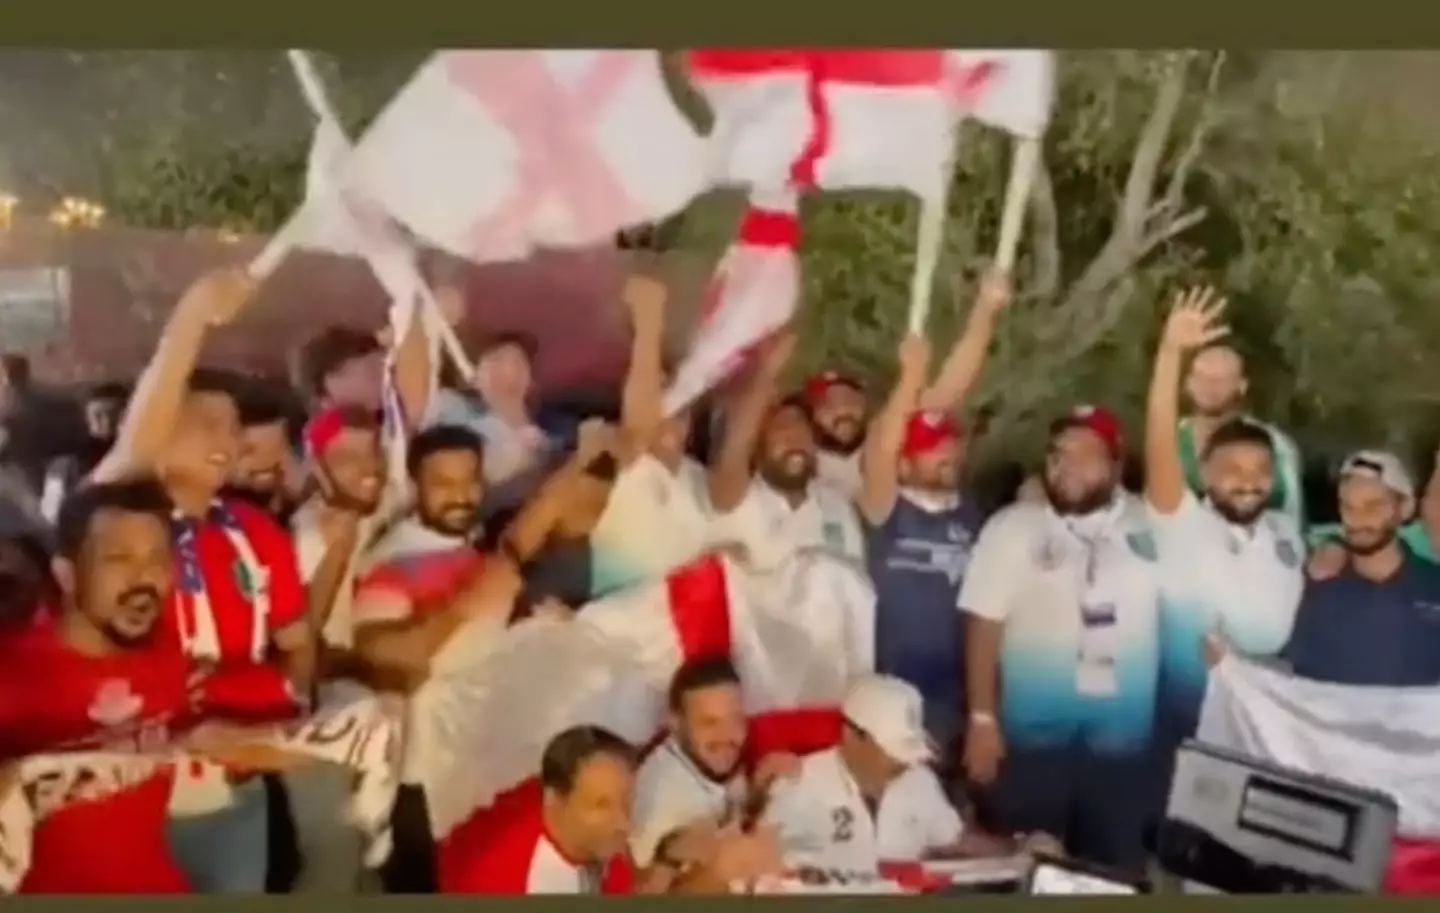 England fans appeared to get the Three Lions tune wrong.